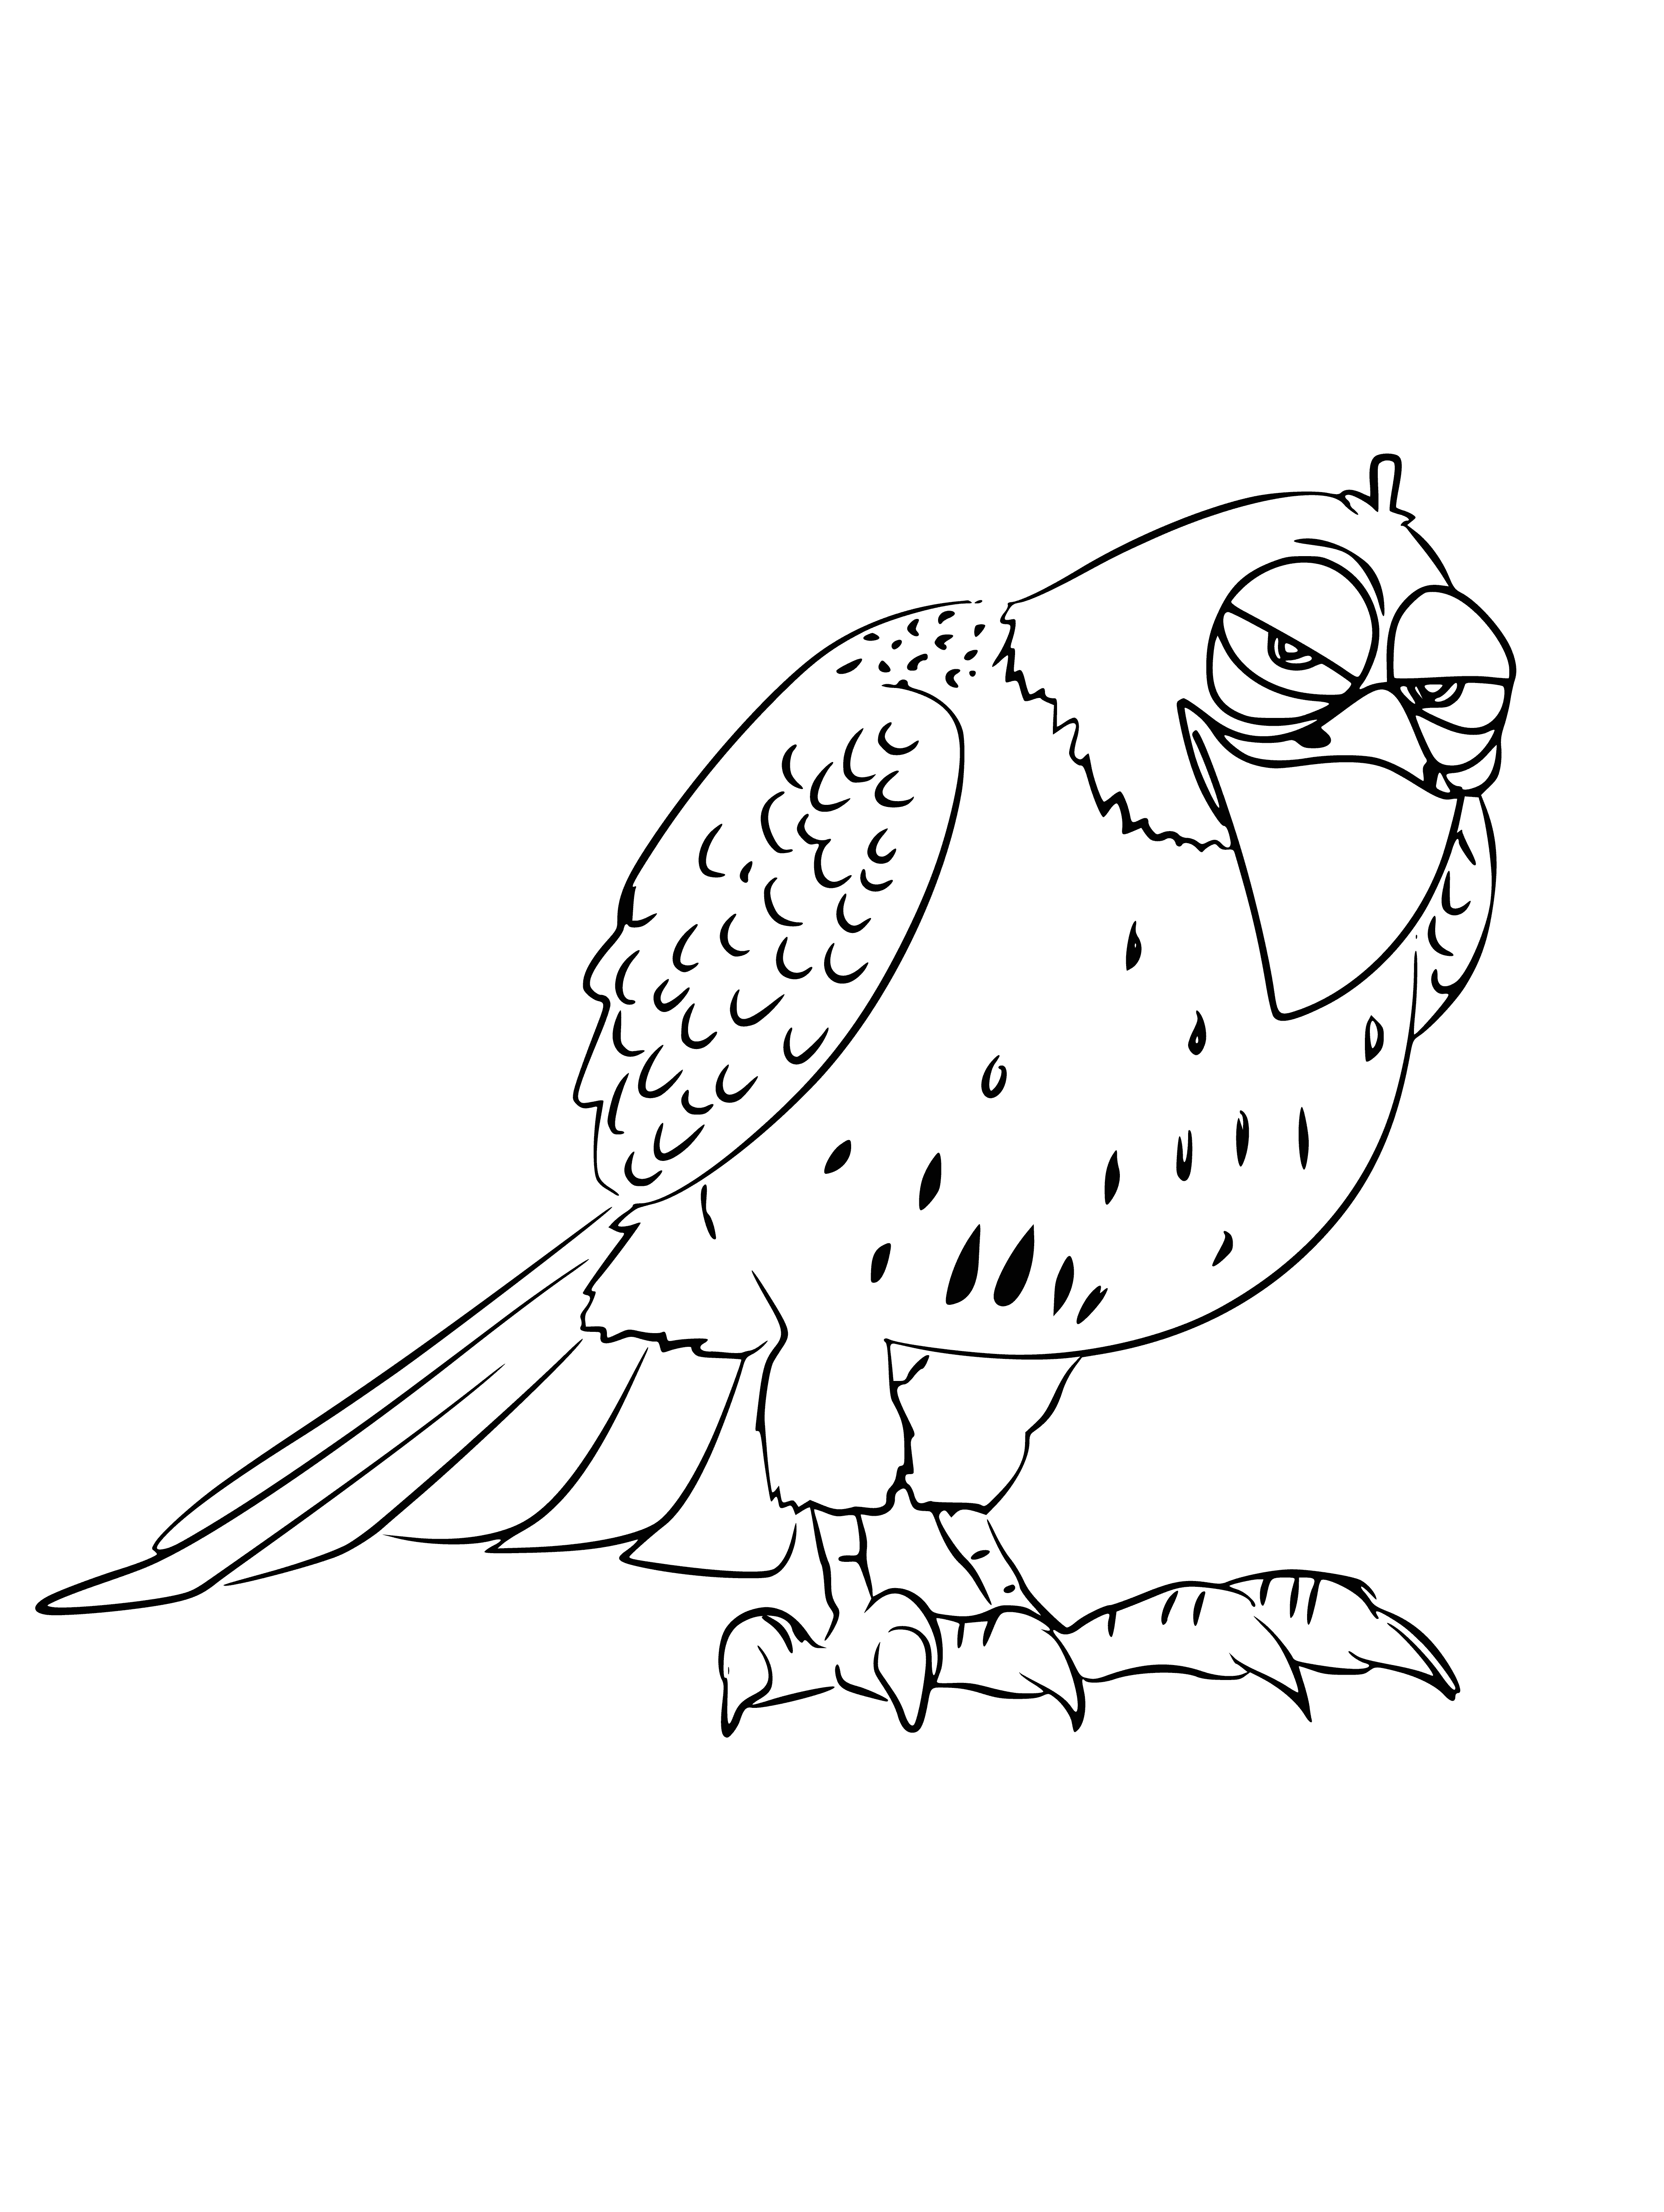 coloring page: A brown and white hawk with a long beak and talons is perched on a branch in the coloring page.